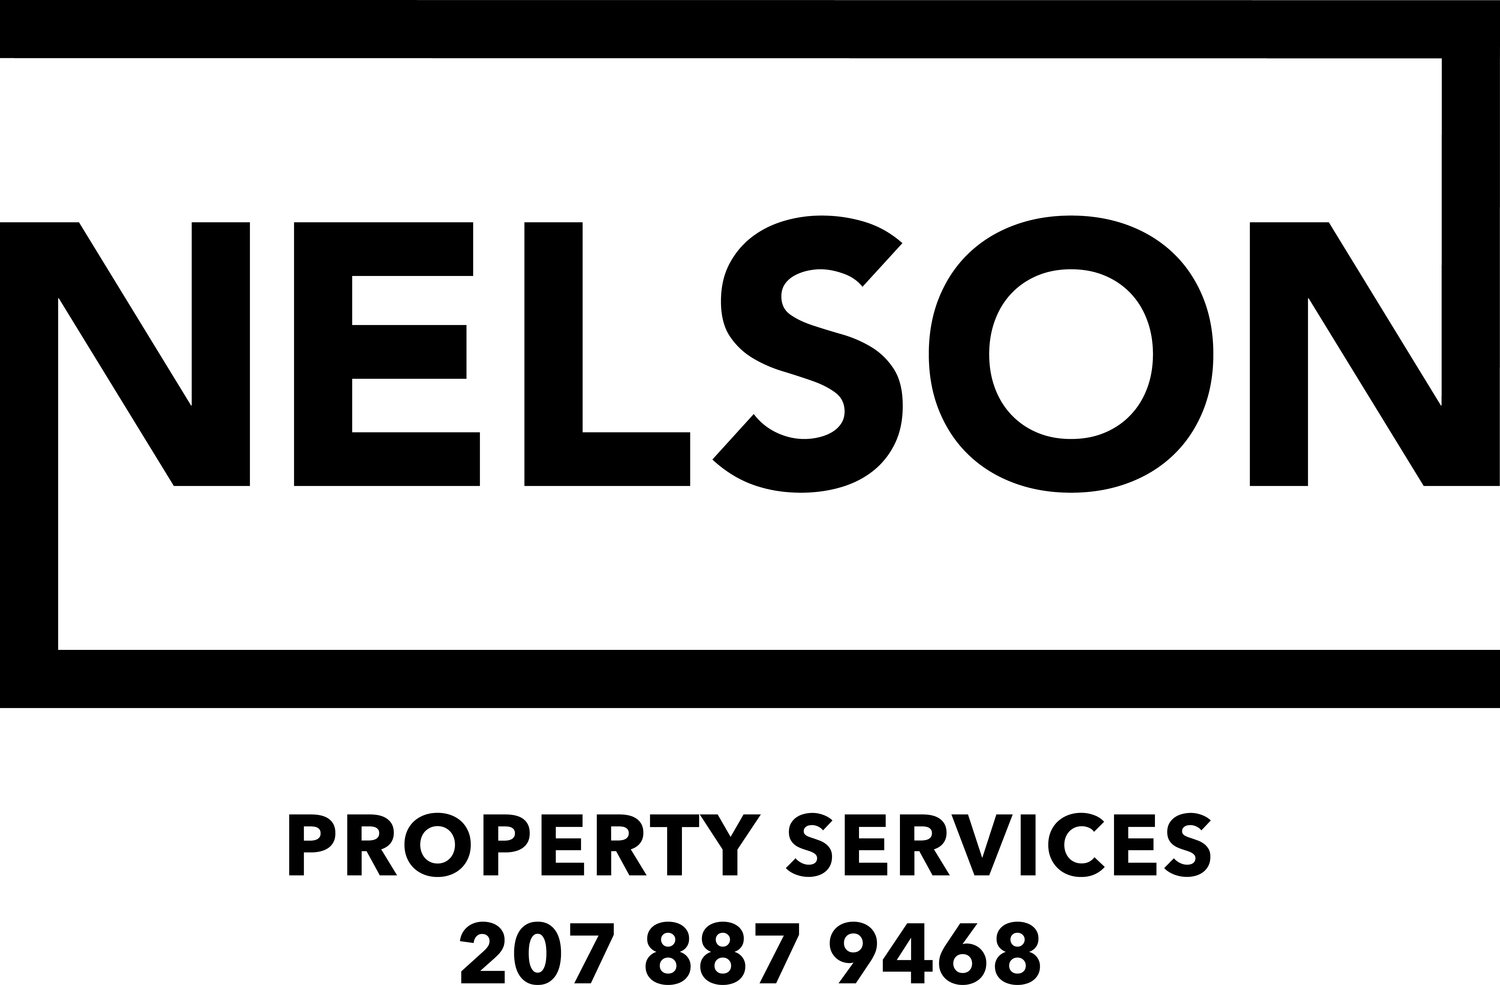 Nelson Property Services